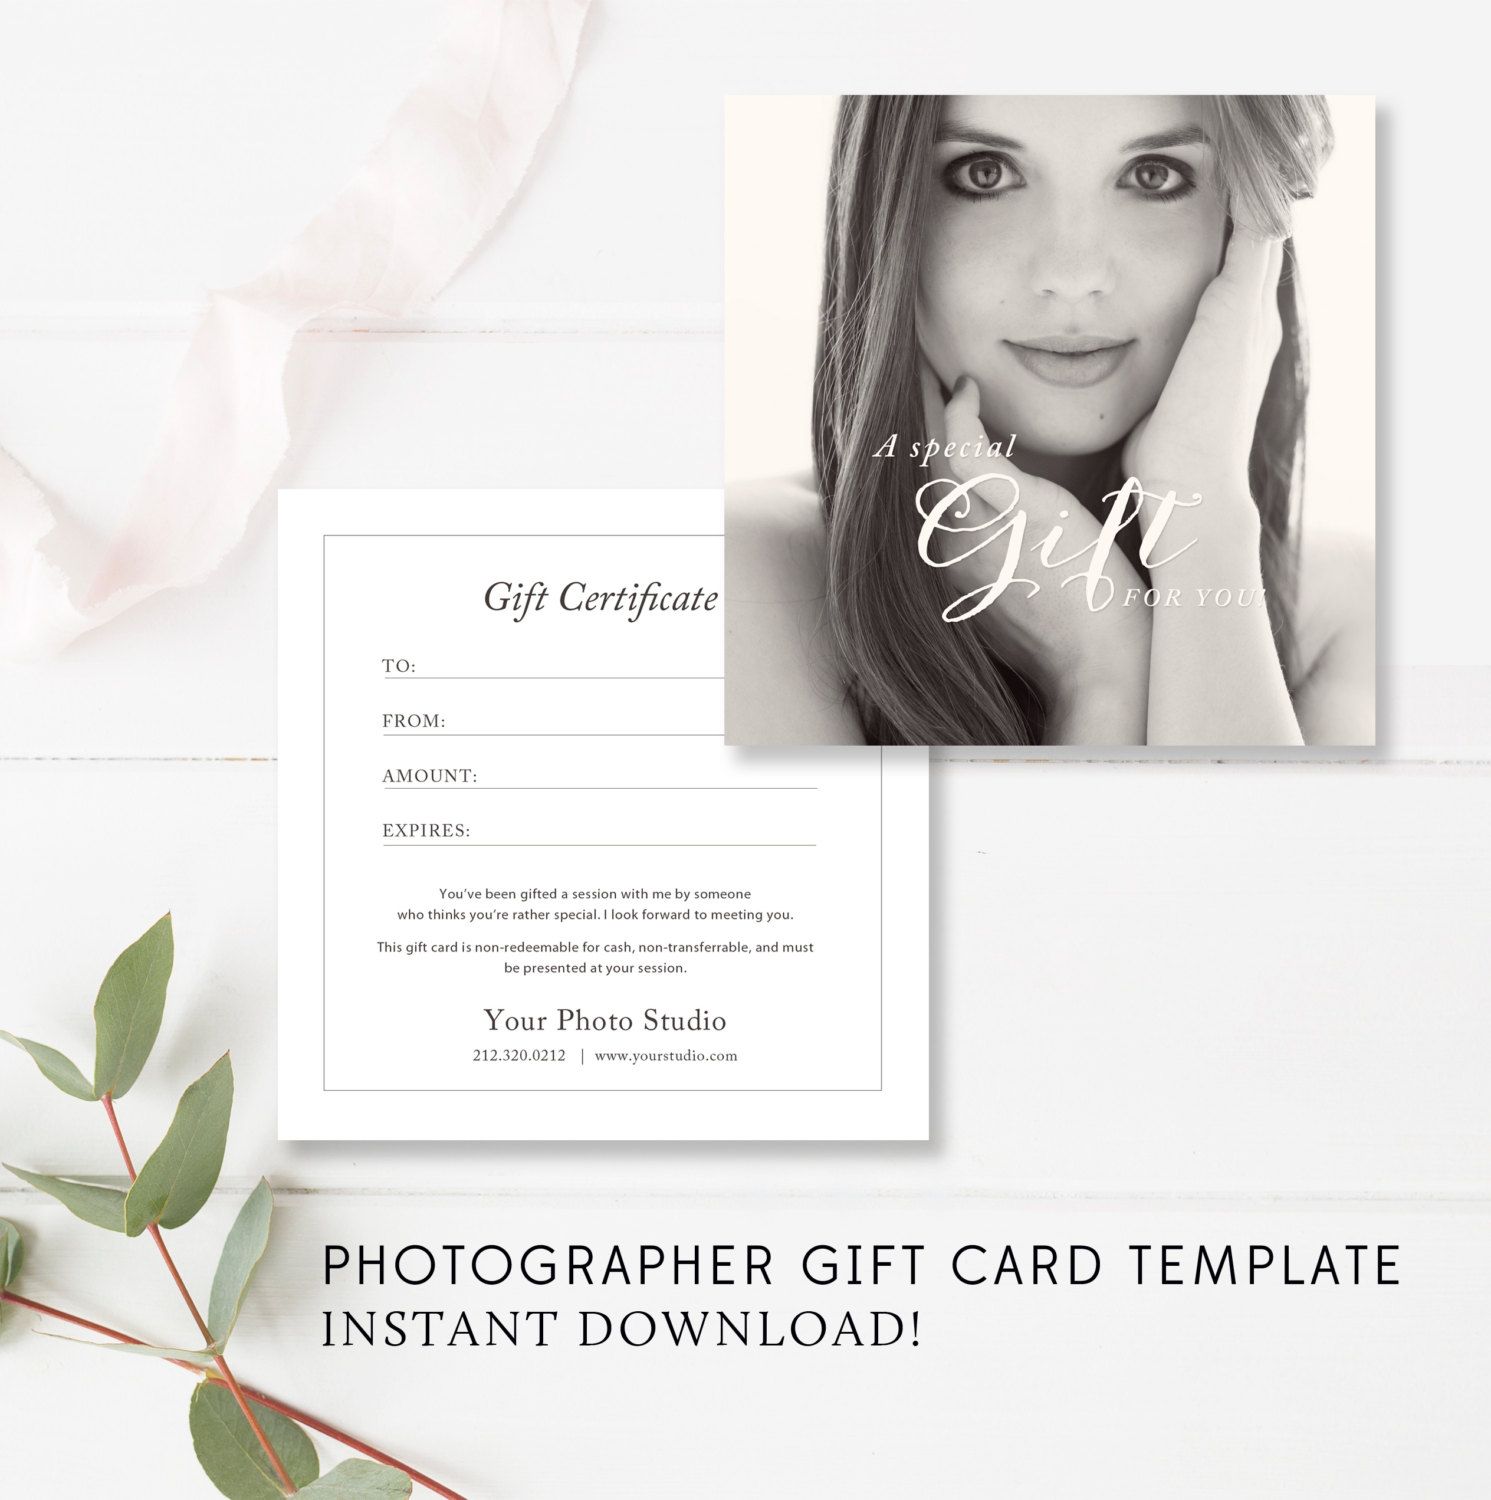 Photography Gift Card Template Photographer Gift Certificate | Etsy